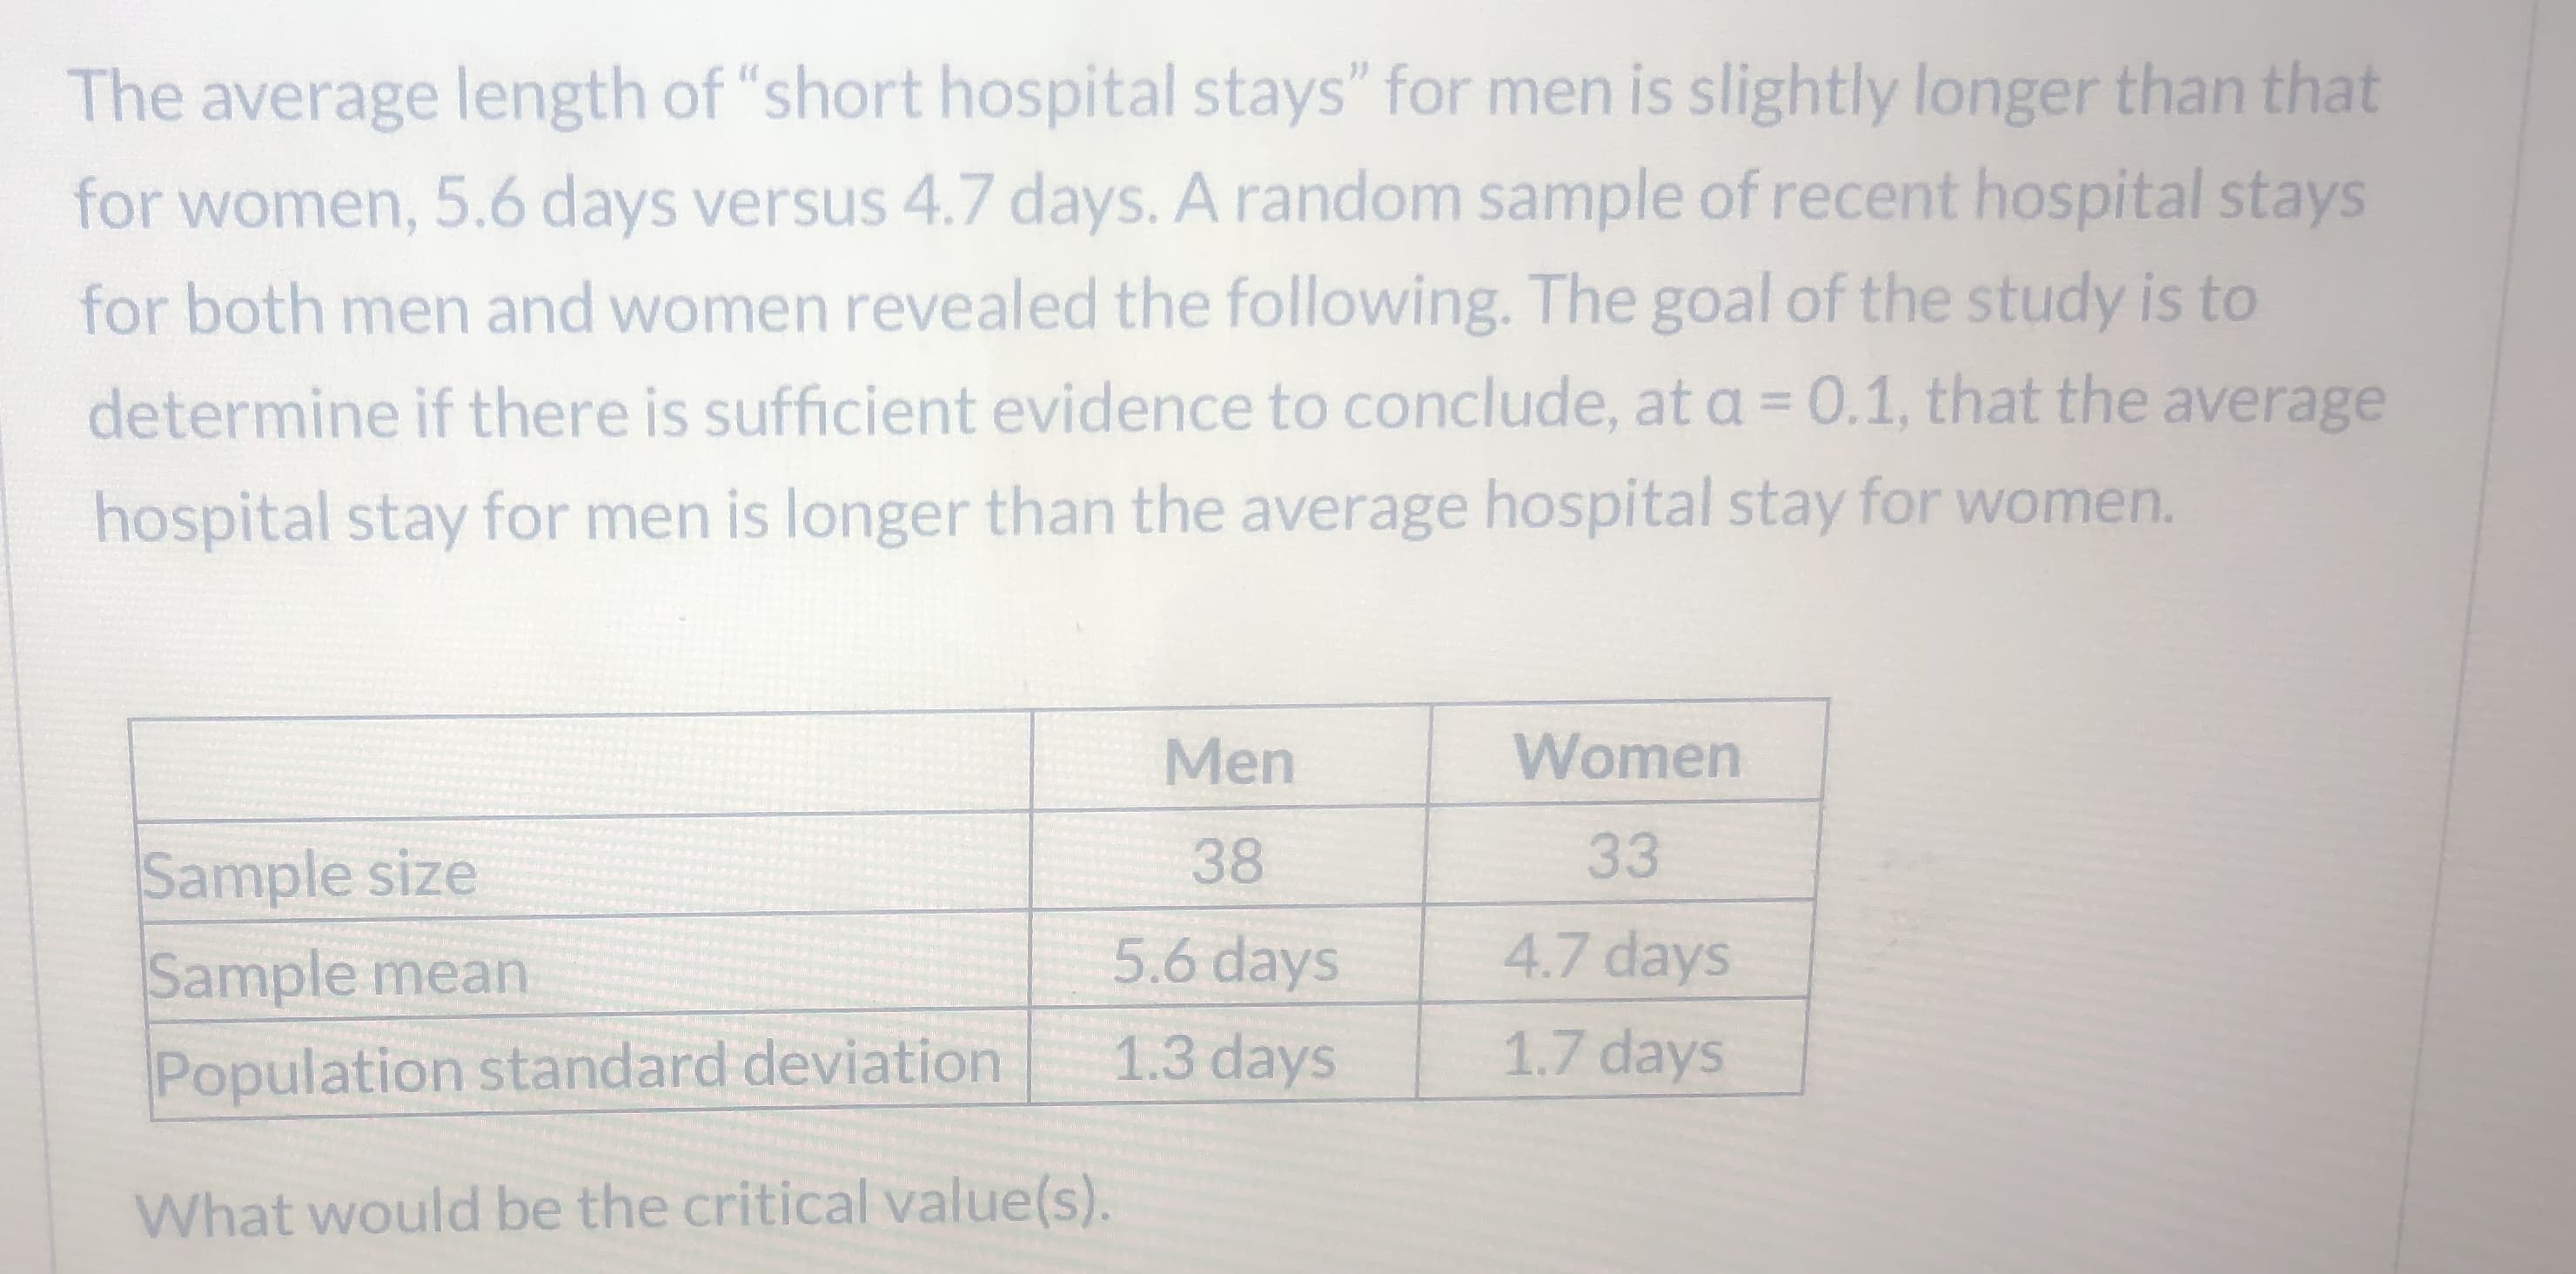 The average length of "short hospital stays" for men is slightly longer than that
for women, 5.6 days versus 4.7 days. A random sample of recent hospital stays
for both men and women revealed the following. The goal of the study is to
determine if there is sufficient evidence to conclude, ata = 0.1, that the average
hospital stay for men is longer than the average hospital stay for women.
